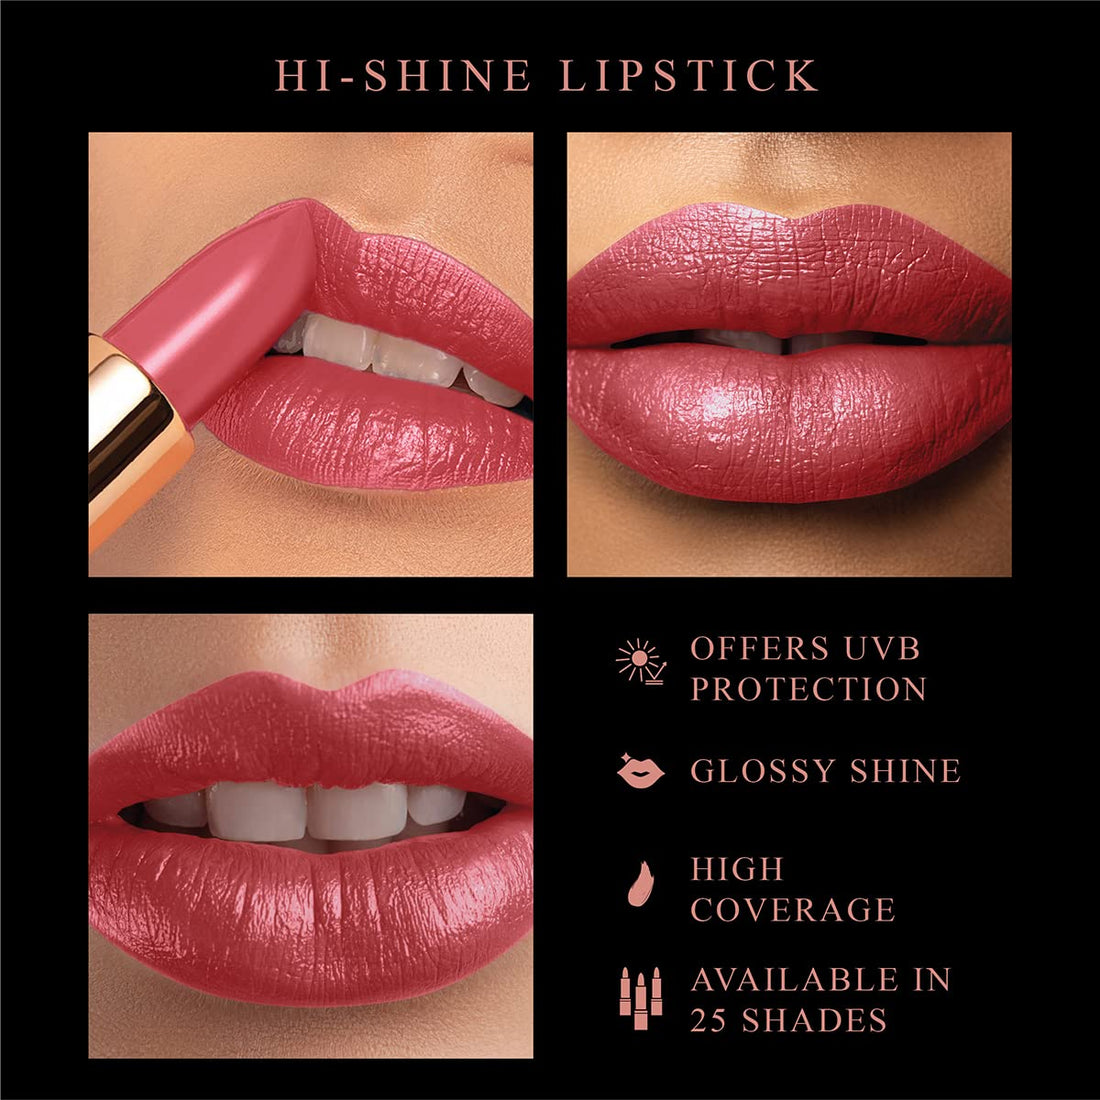 My Glam Manish Malhotra Beauty Hi-Shine Lipstick-Old Rose (Red)-4 gm | Long Lasting Lipstick With UVB Protection | Highly Pigmented Formula